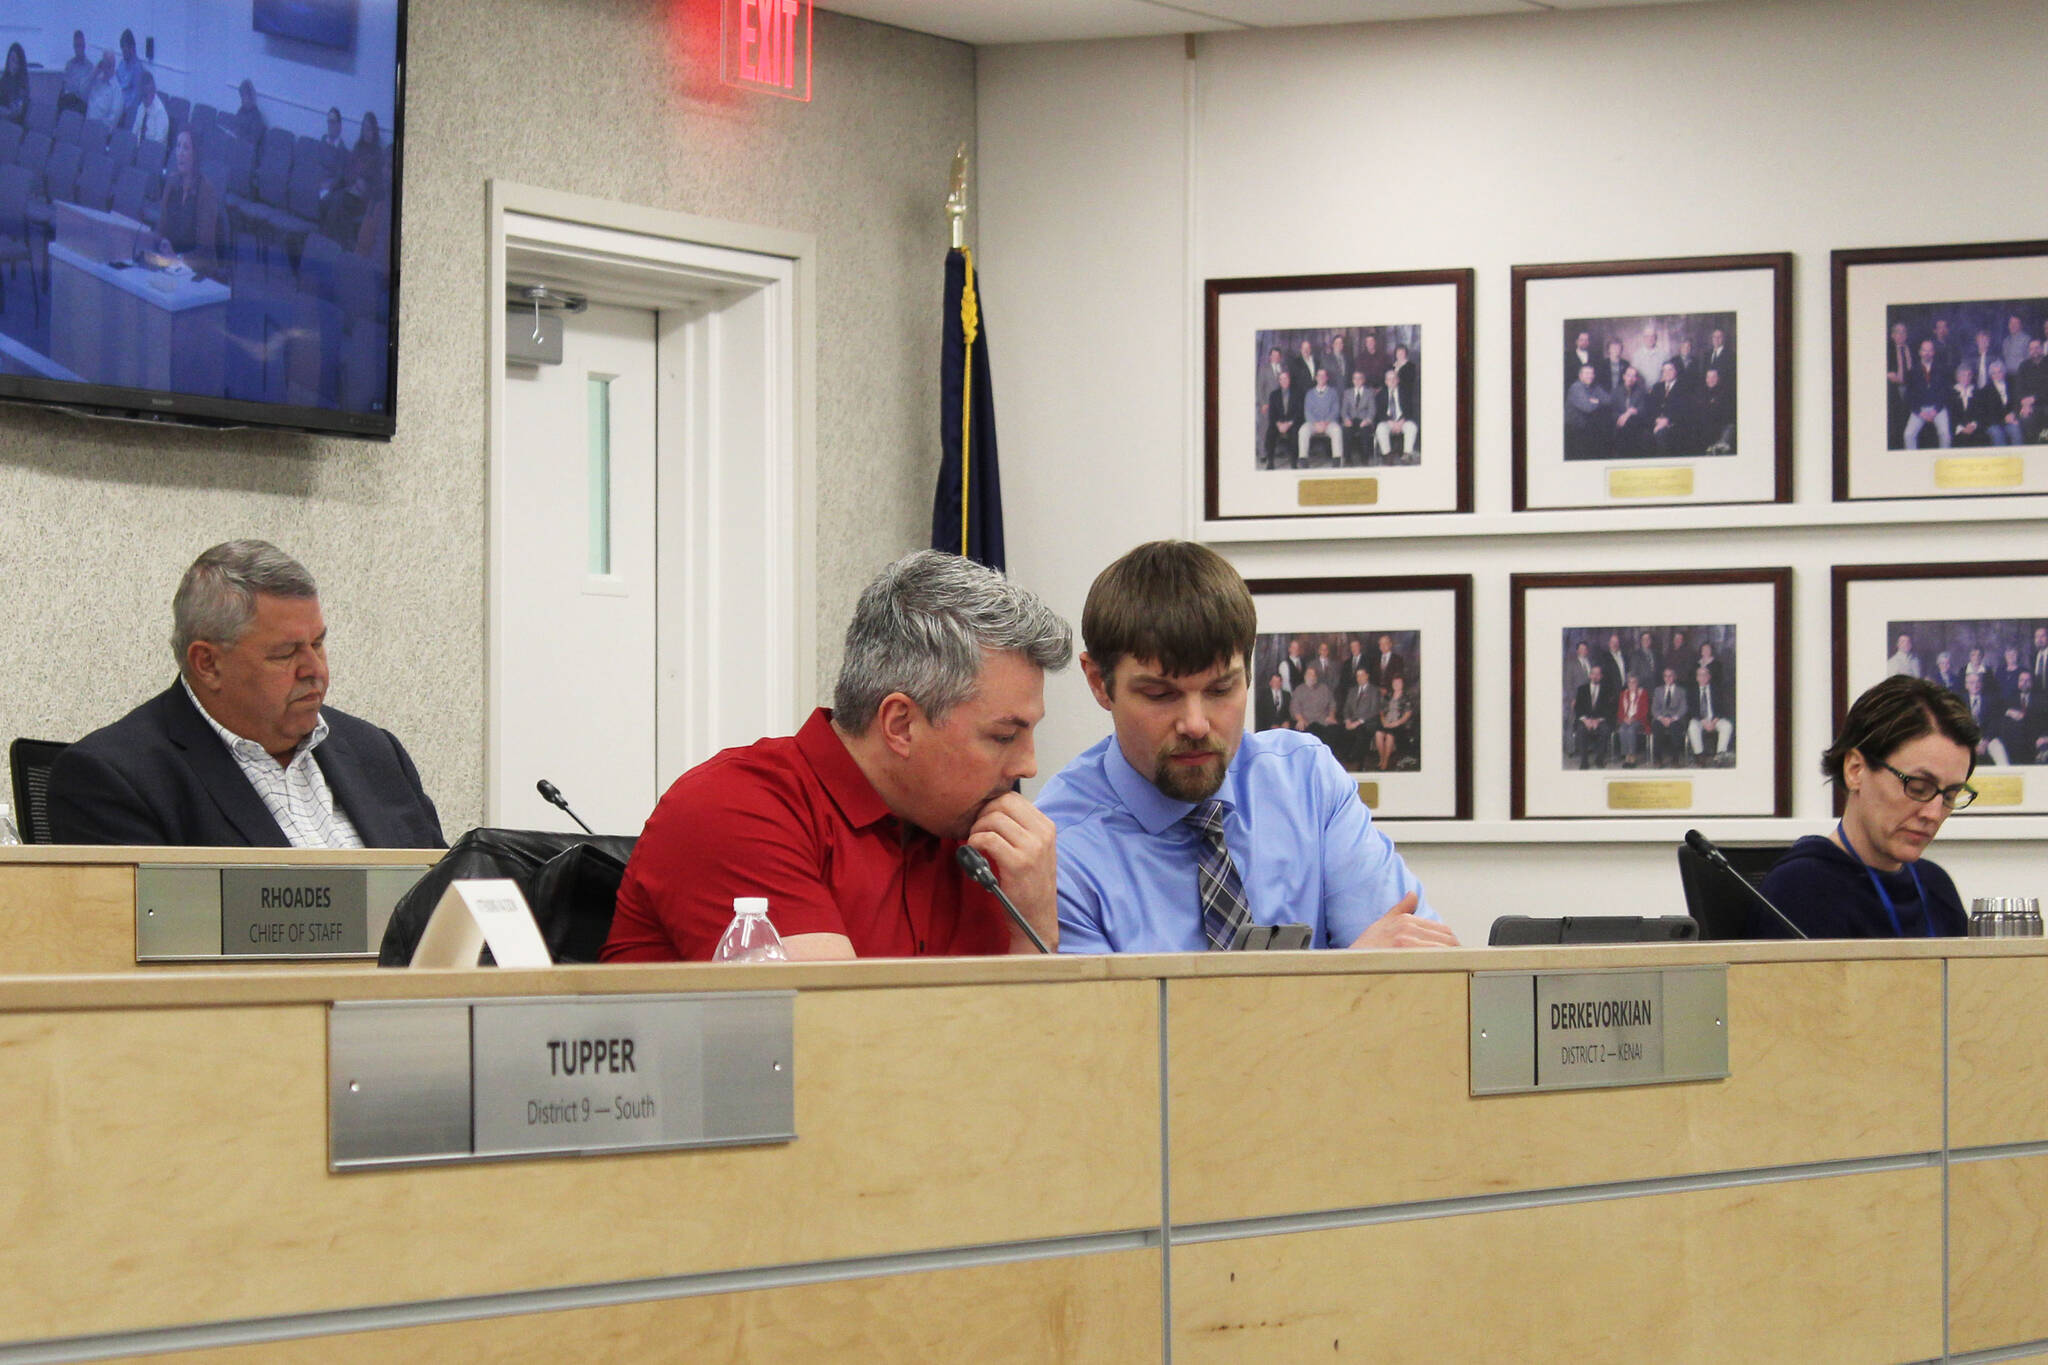 Assembly members Richard Derkevorkian (left) and Jesse Bjorkman (right) consult during a meeting of the Kenai Peninsula Borough Assembly on Tuesday, Dec. 7, 2021 in Soldotna, Alaska. (Ashlyn O'Hara)